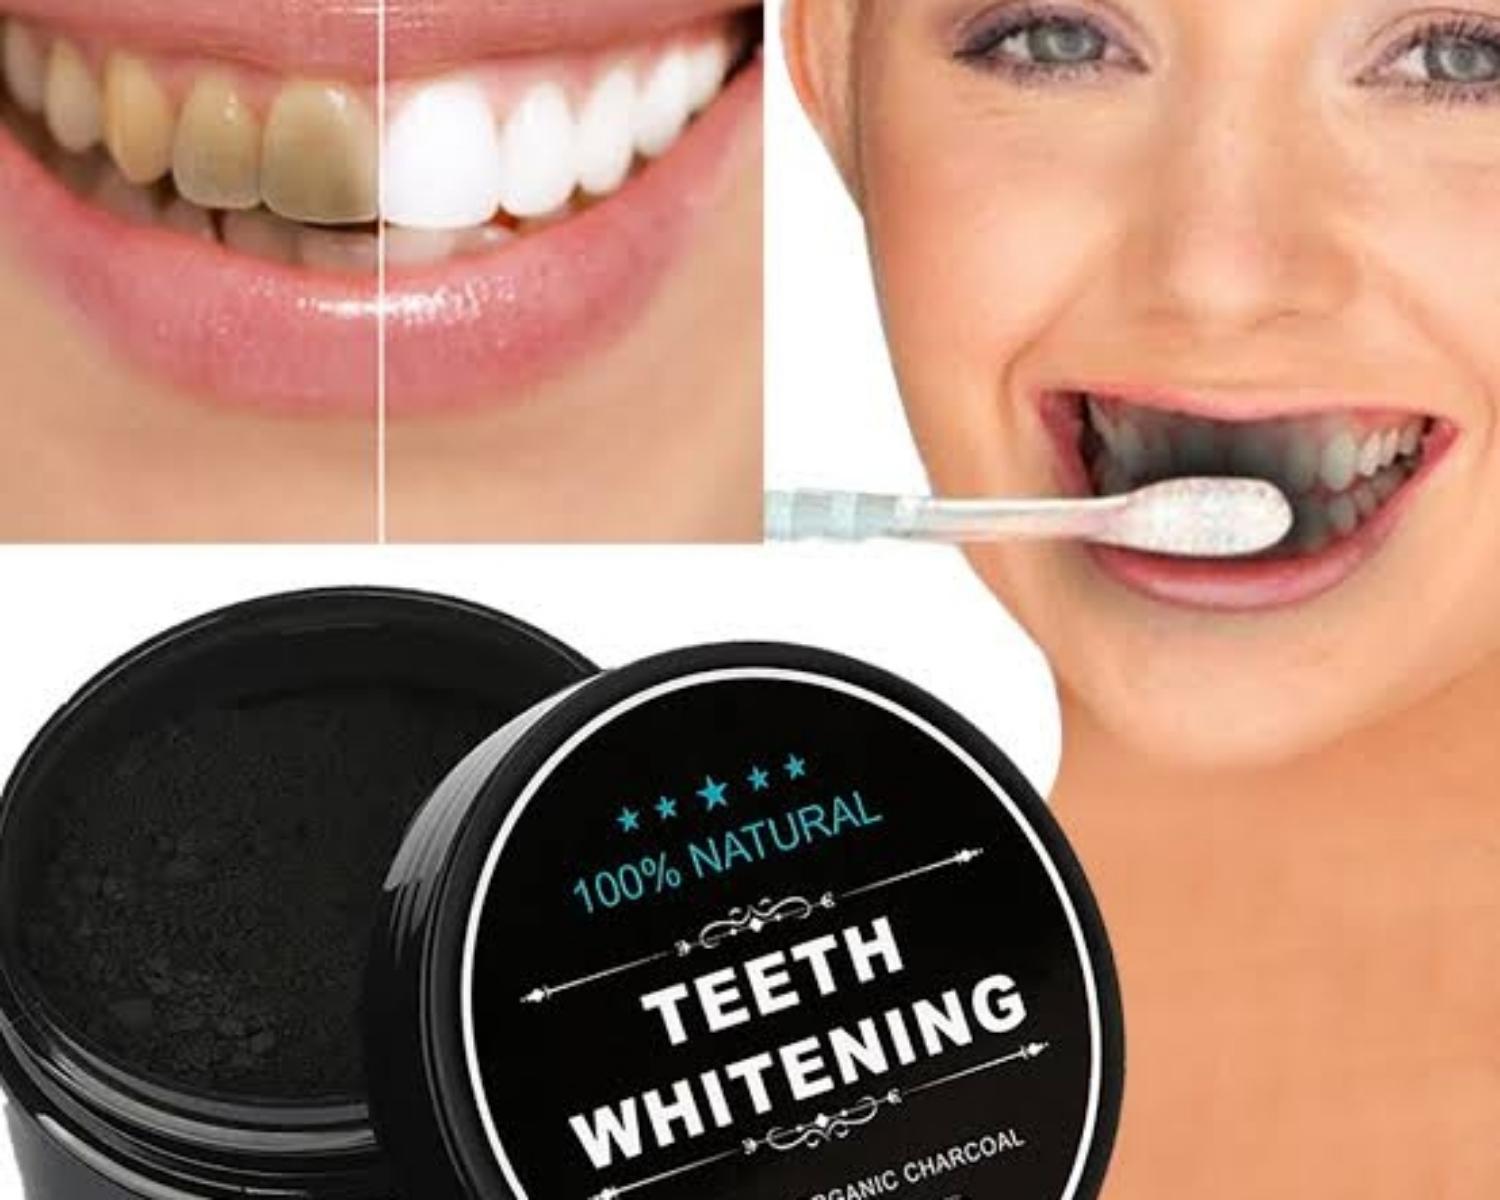 Myth 7: Charcoal toothpaste is better